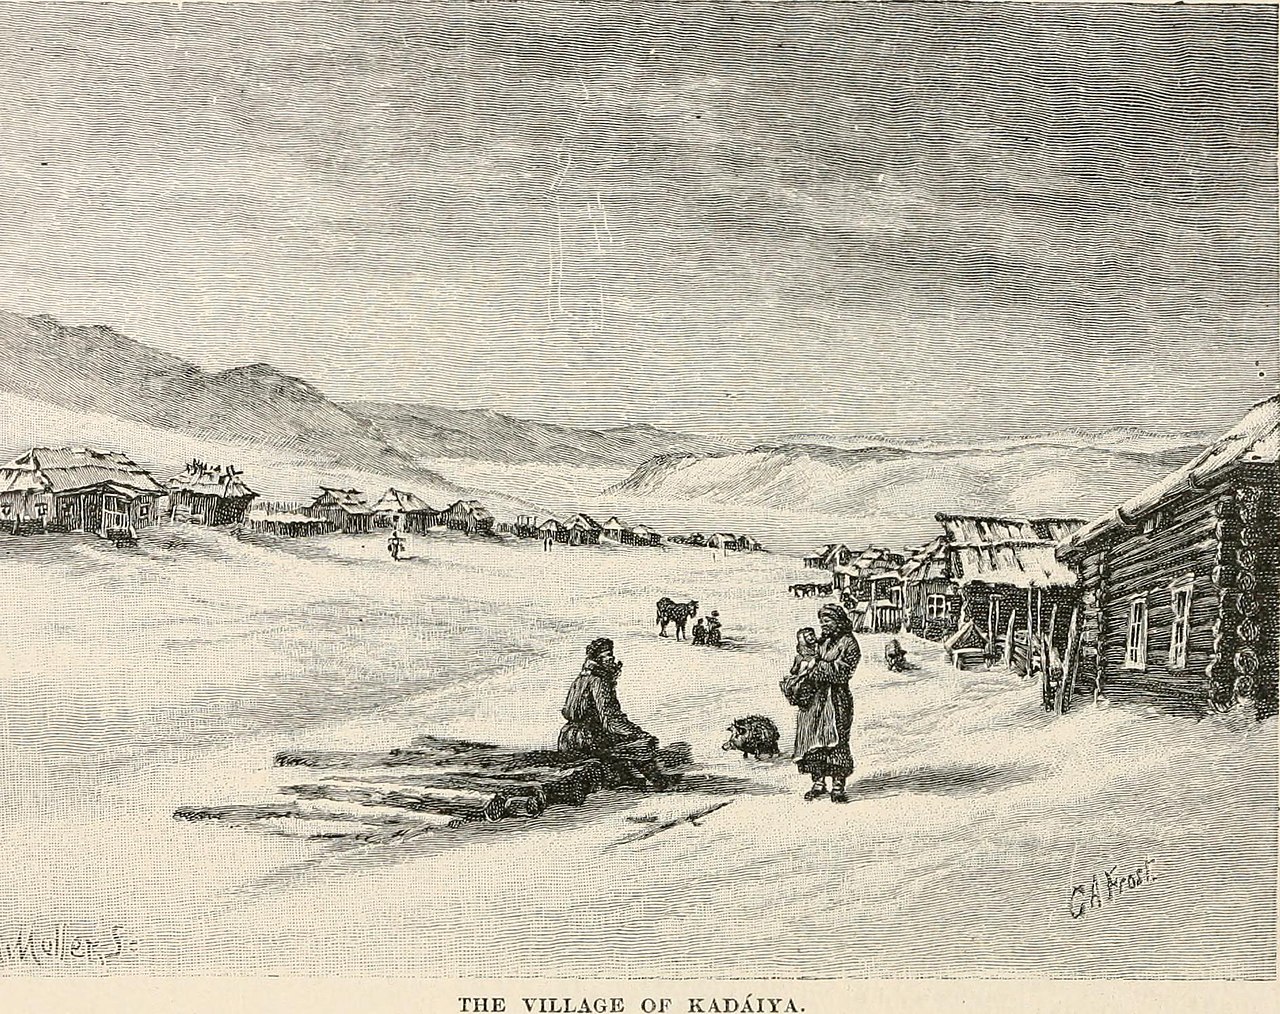 Siberia and the exile system (1891) by Kennan, George